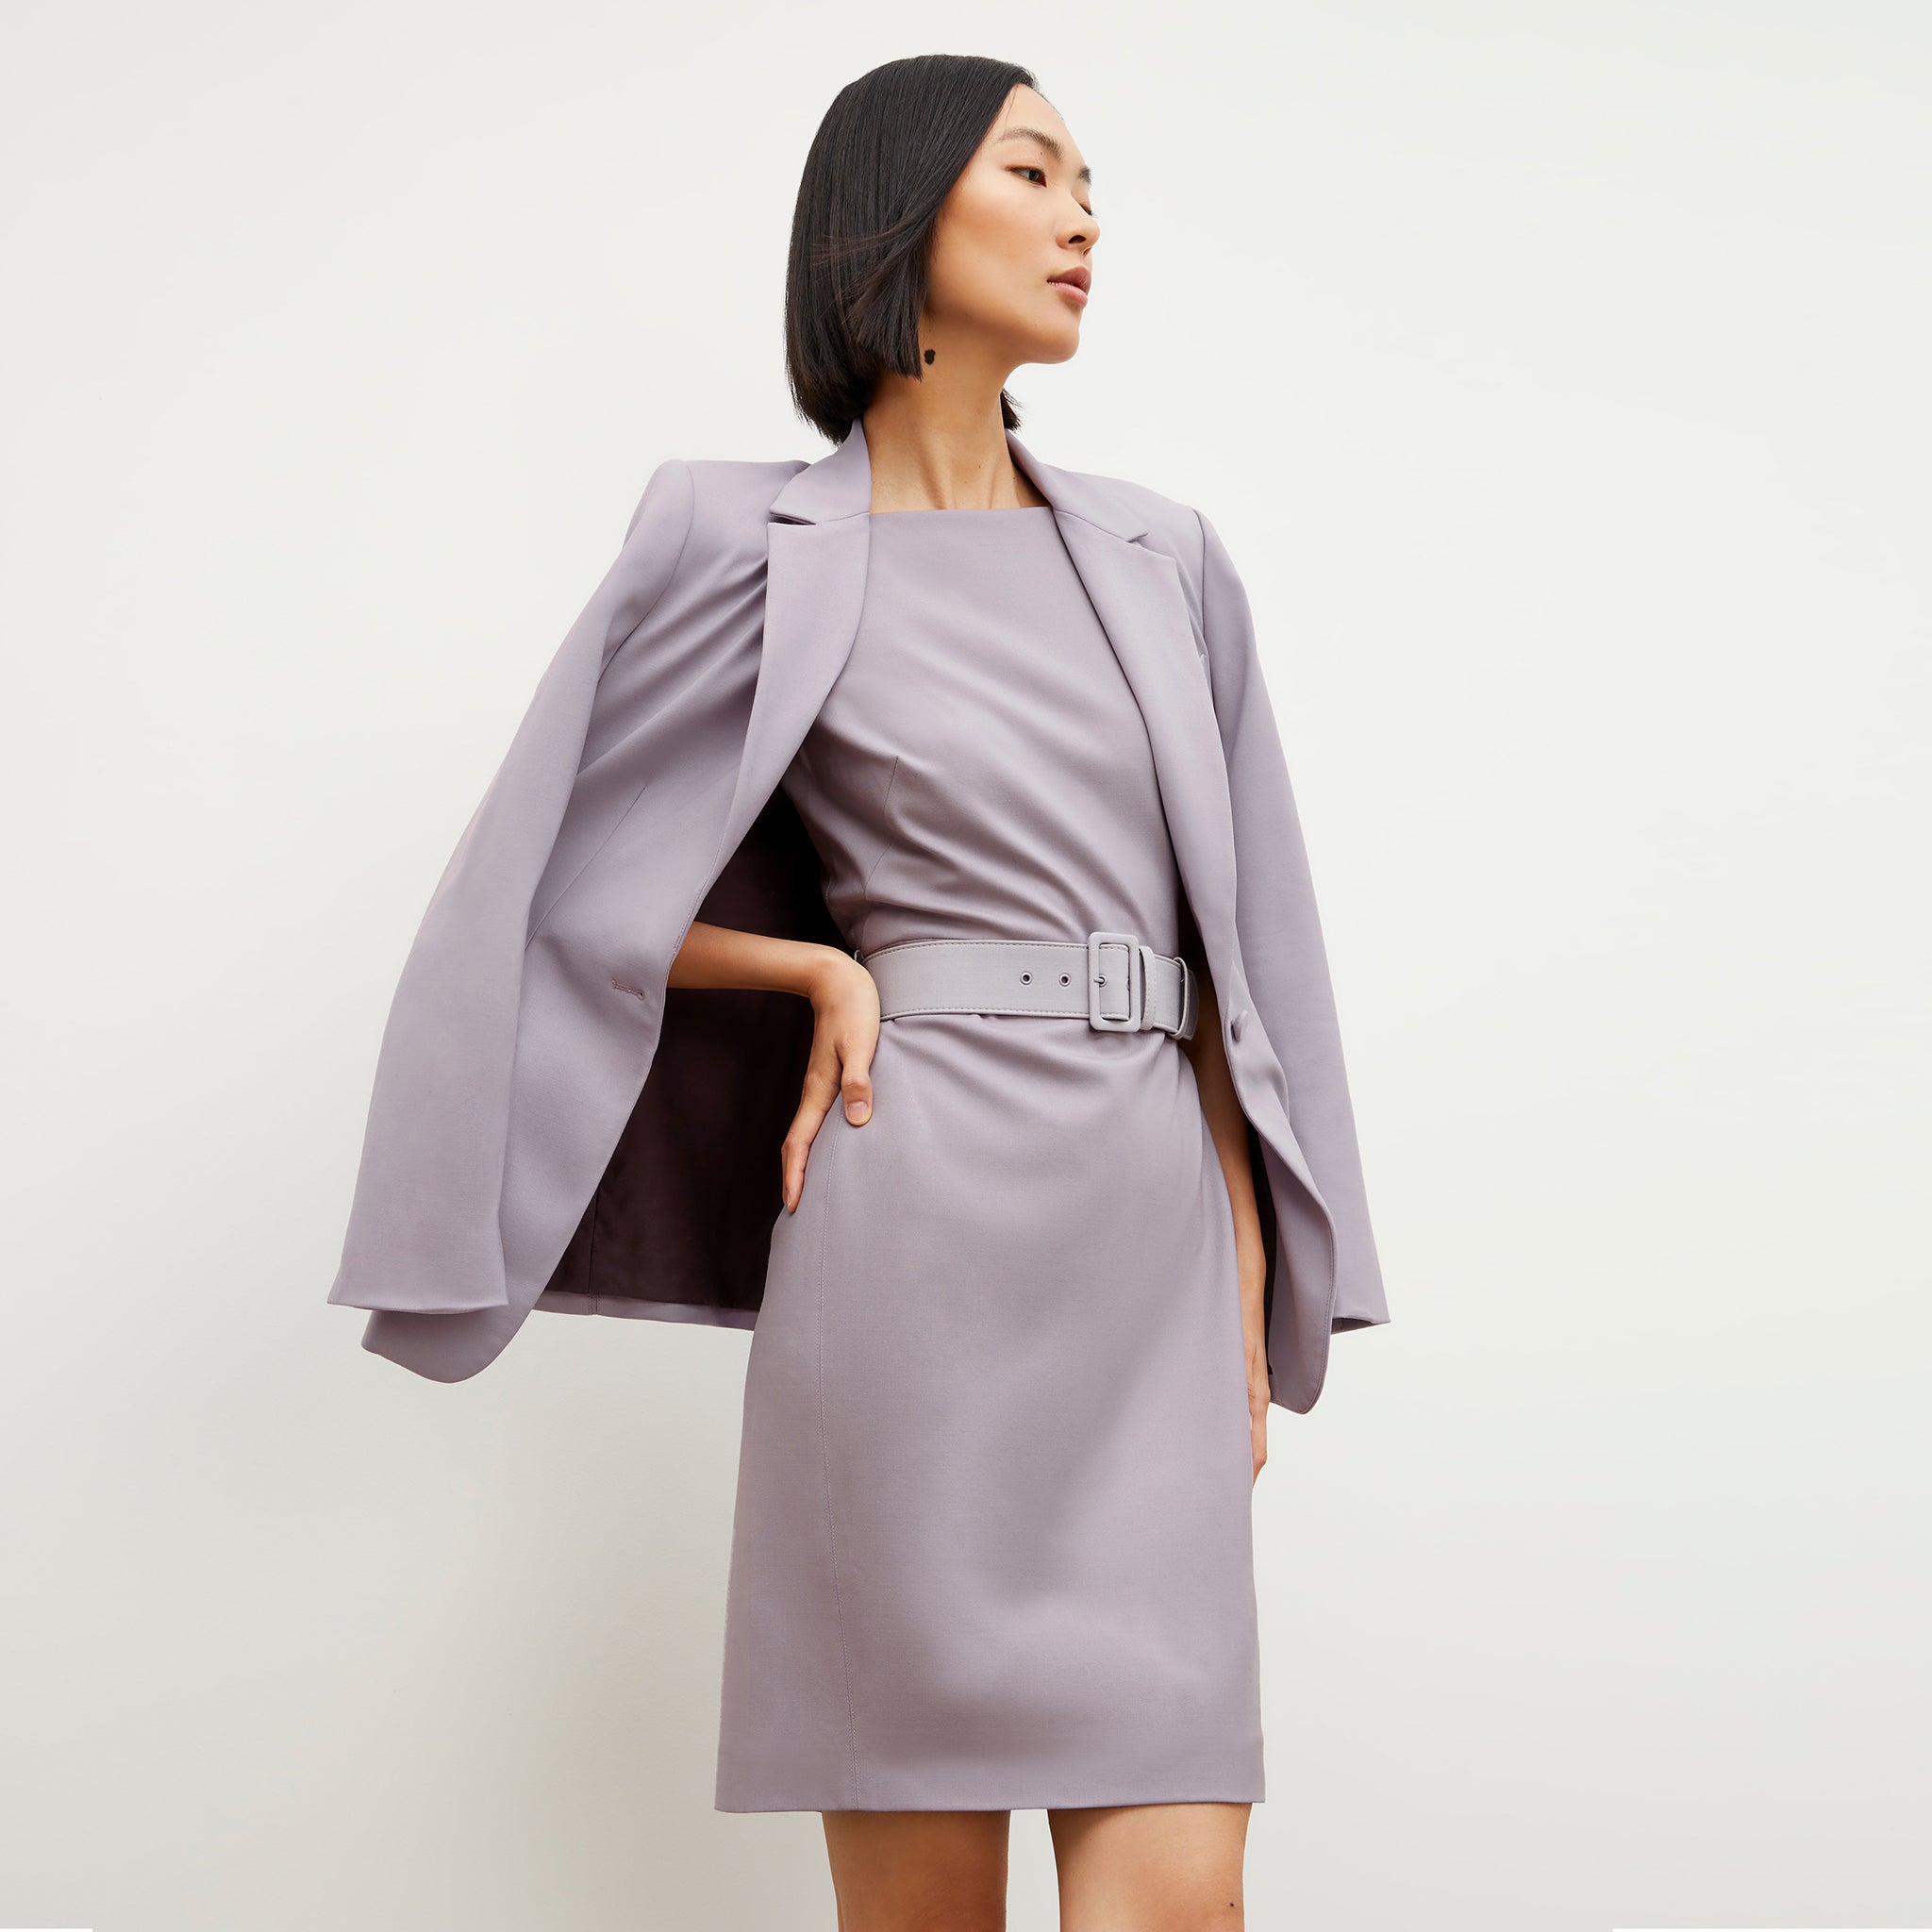 Side image of a woman wearing the Cynthia Dress - Washable Wool Twill in Light Lilac